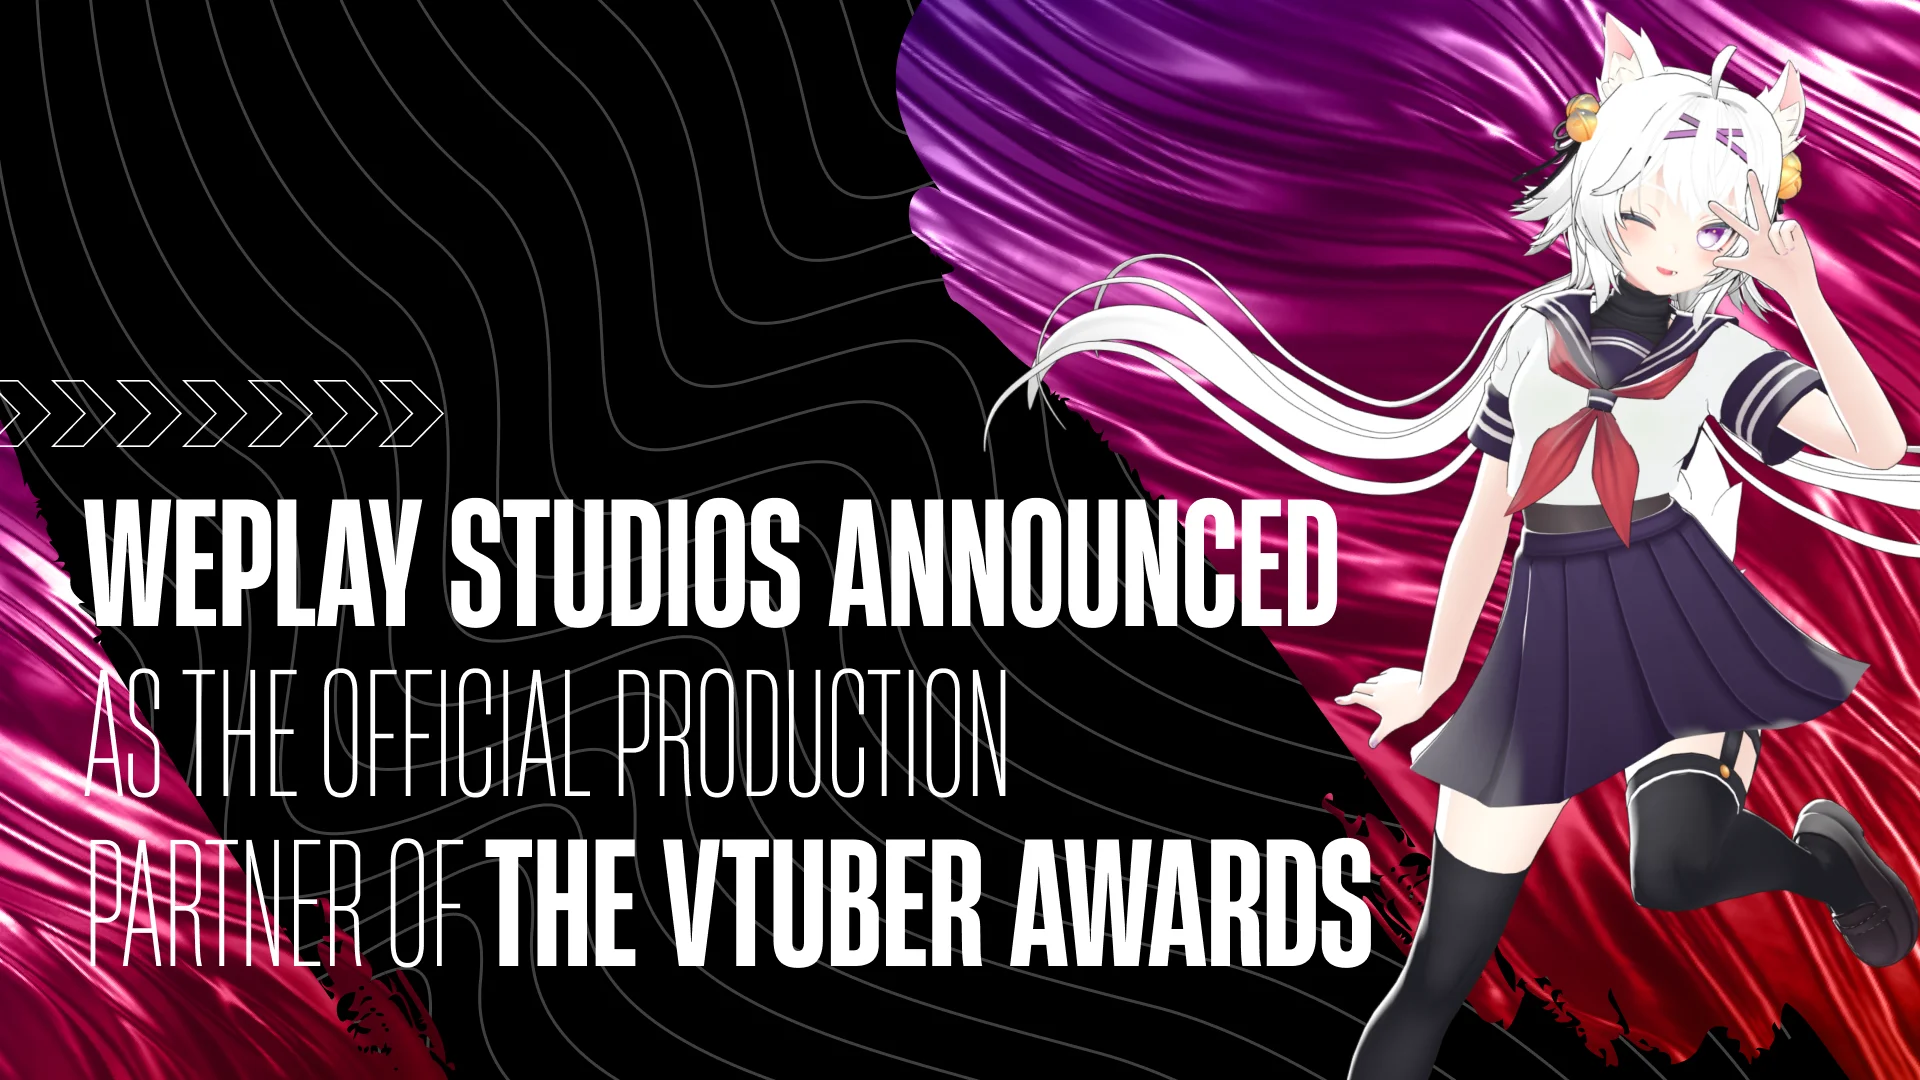 WePlay Studios announced as the official production partner of the VTuber Awards. Visual: WePlay Holding